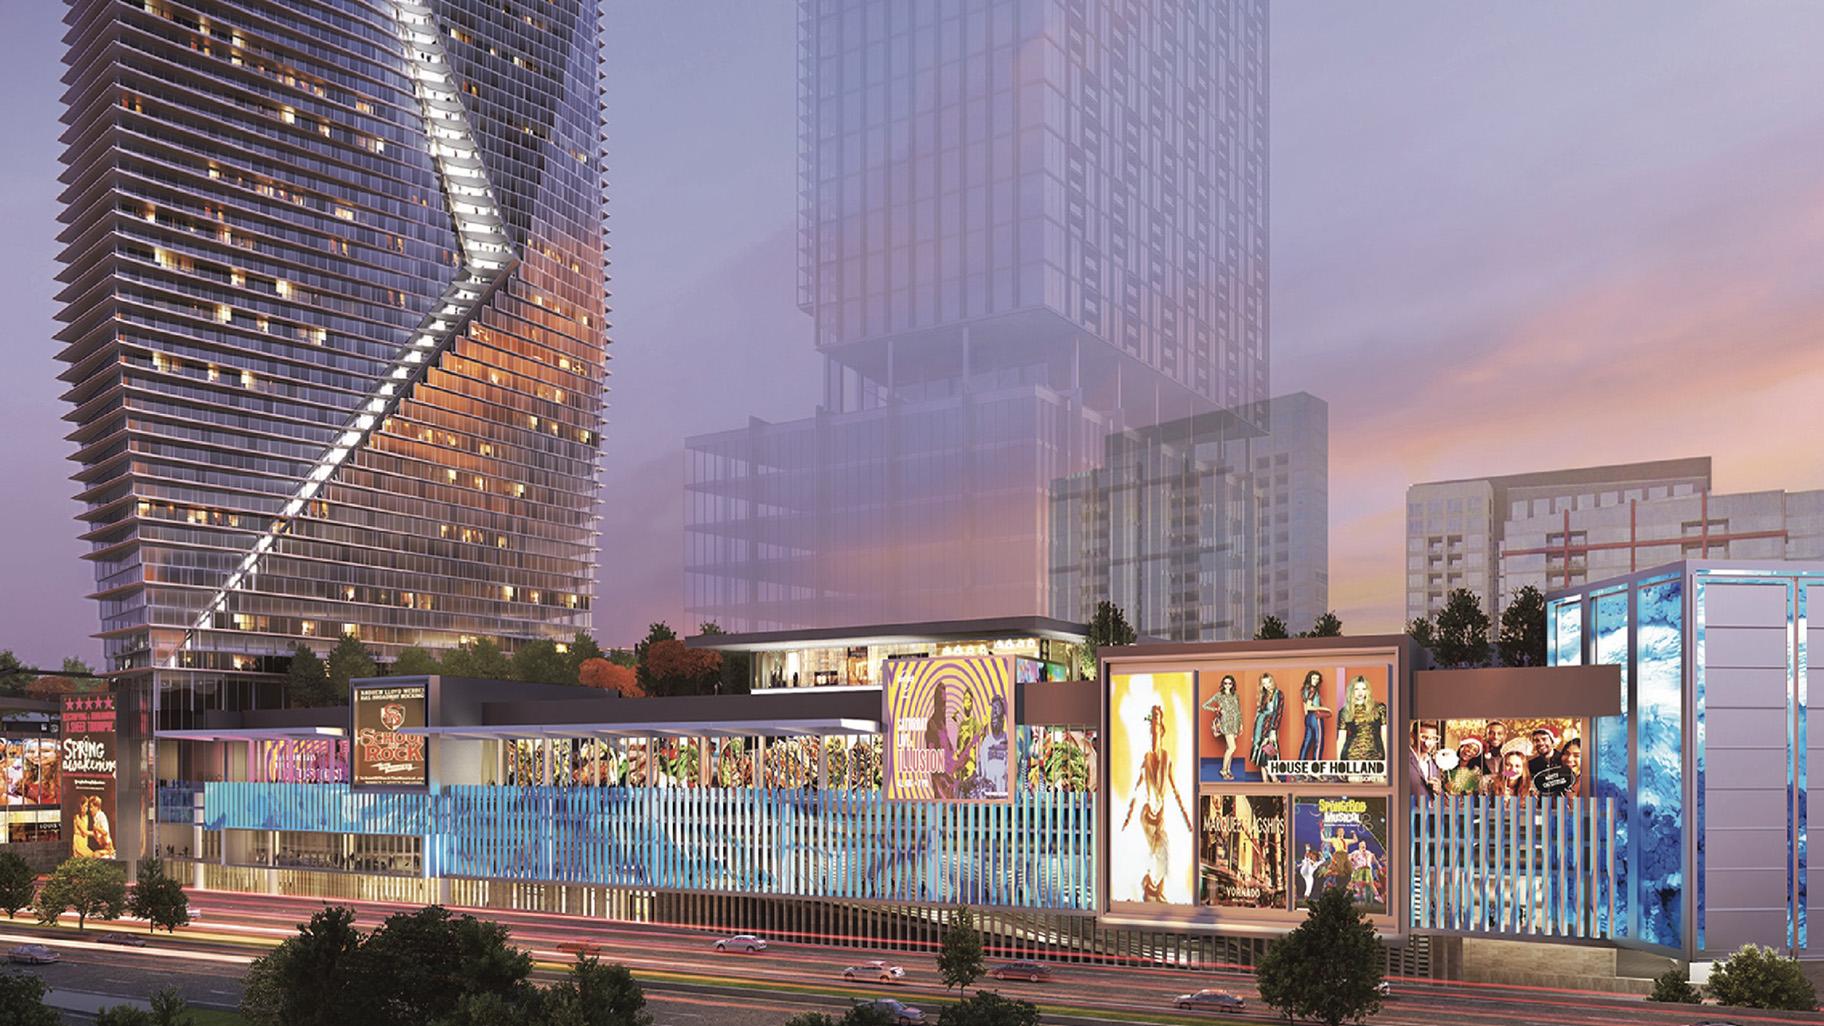 Hard Rock wants to build its casino and resort as part of the proposed One Central development, across DuSable Lake Shore Drive from Soldier Field. (Provided)